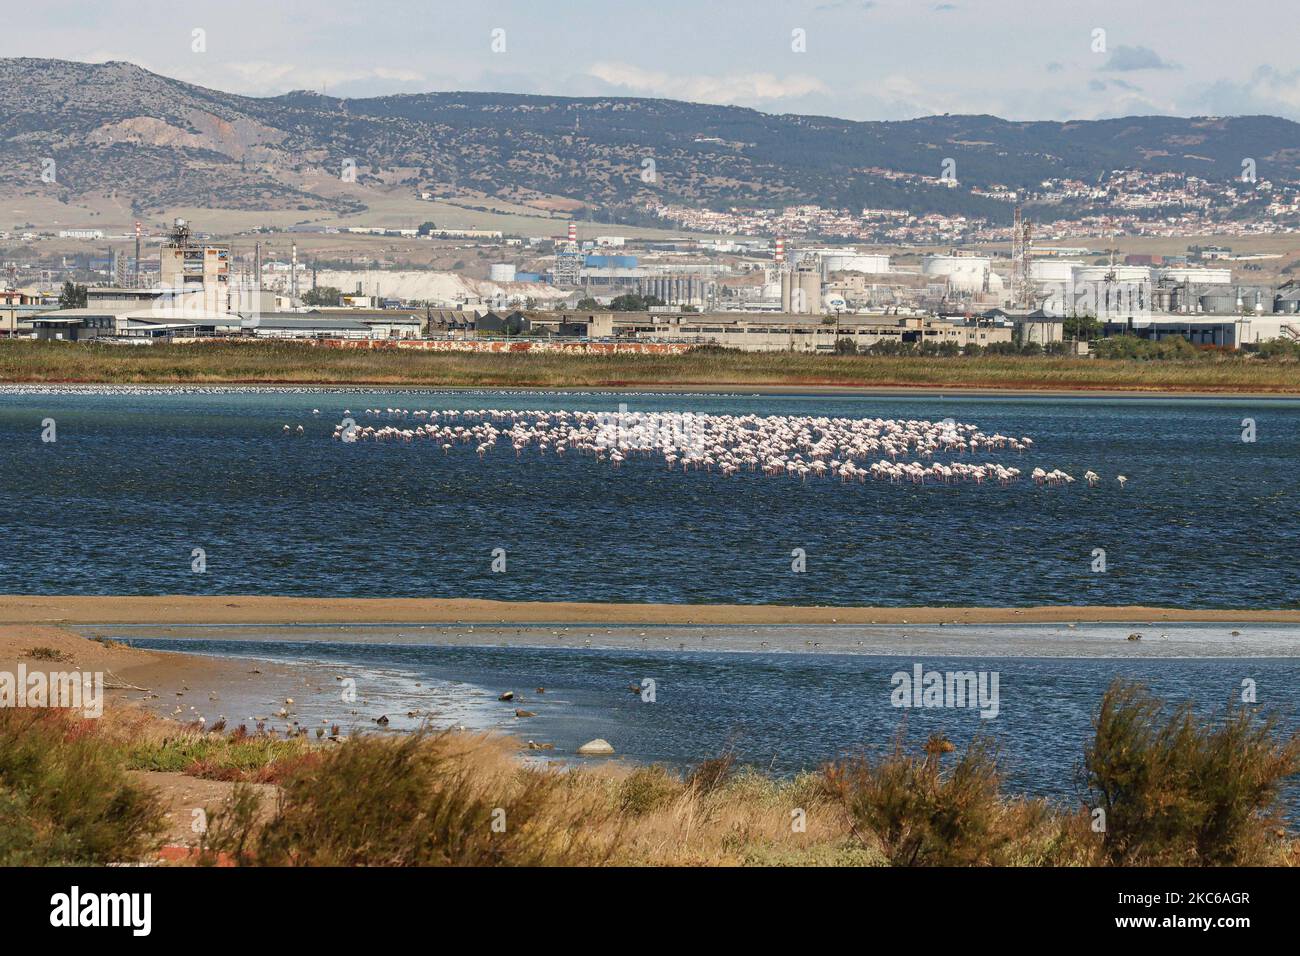 Flamingos as seen in Kalochori lagoon near Thessaloniki city in the Axios Delta National Park. The migration birds stay for a stop in Greece during their travel, at the wetlands. The flock of flamingoes, birds of Phoenicopteriformes family as seen in Kalochori lagoon with Thessaloniki city in the background. The flamingo colonies live here in the shallow fresh water, as an intermediate stop on their migration route, part of Axios Delta National park in Northern Greece. The national park of Axios Delta near Thessaloniki city in Greece consists of 4 rivers Axios, Galikos, Loudias and Aliakmonas, Stock Photo